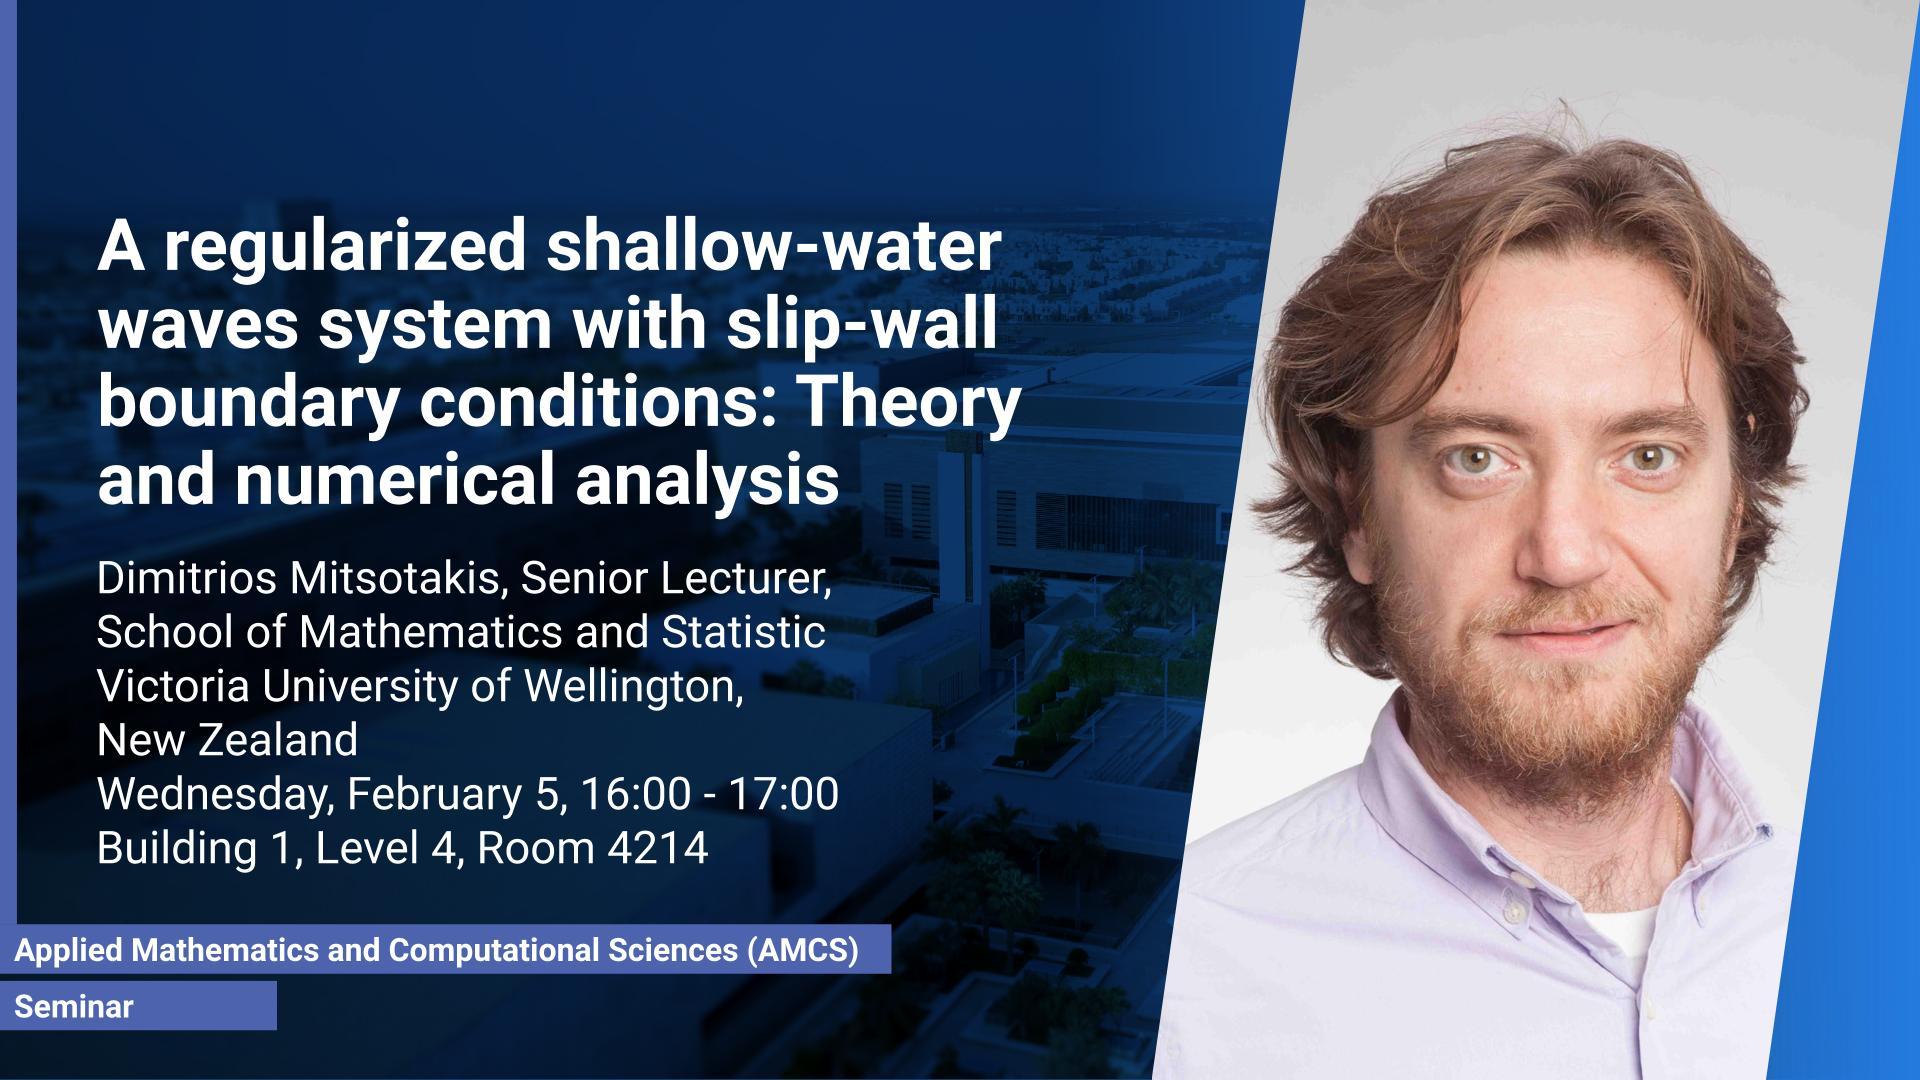 KAUST CEMSE AMCS Seminar Dimitrios Mitsotakis a regularized shallow water waves system